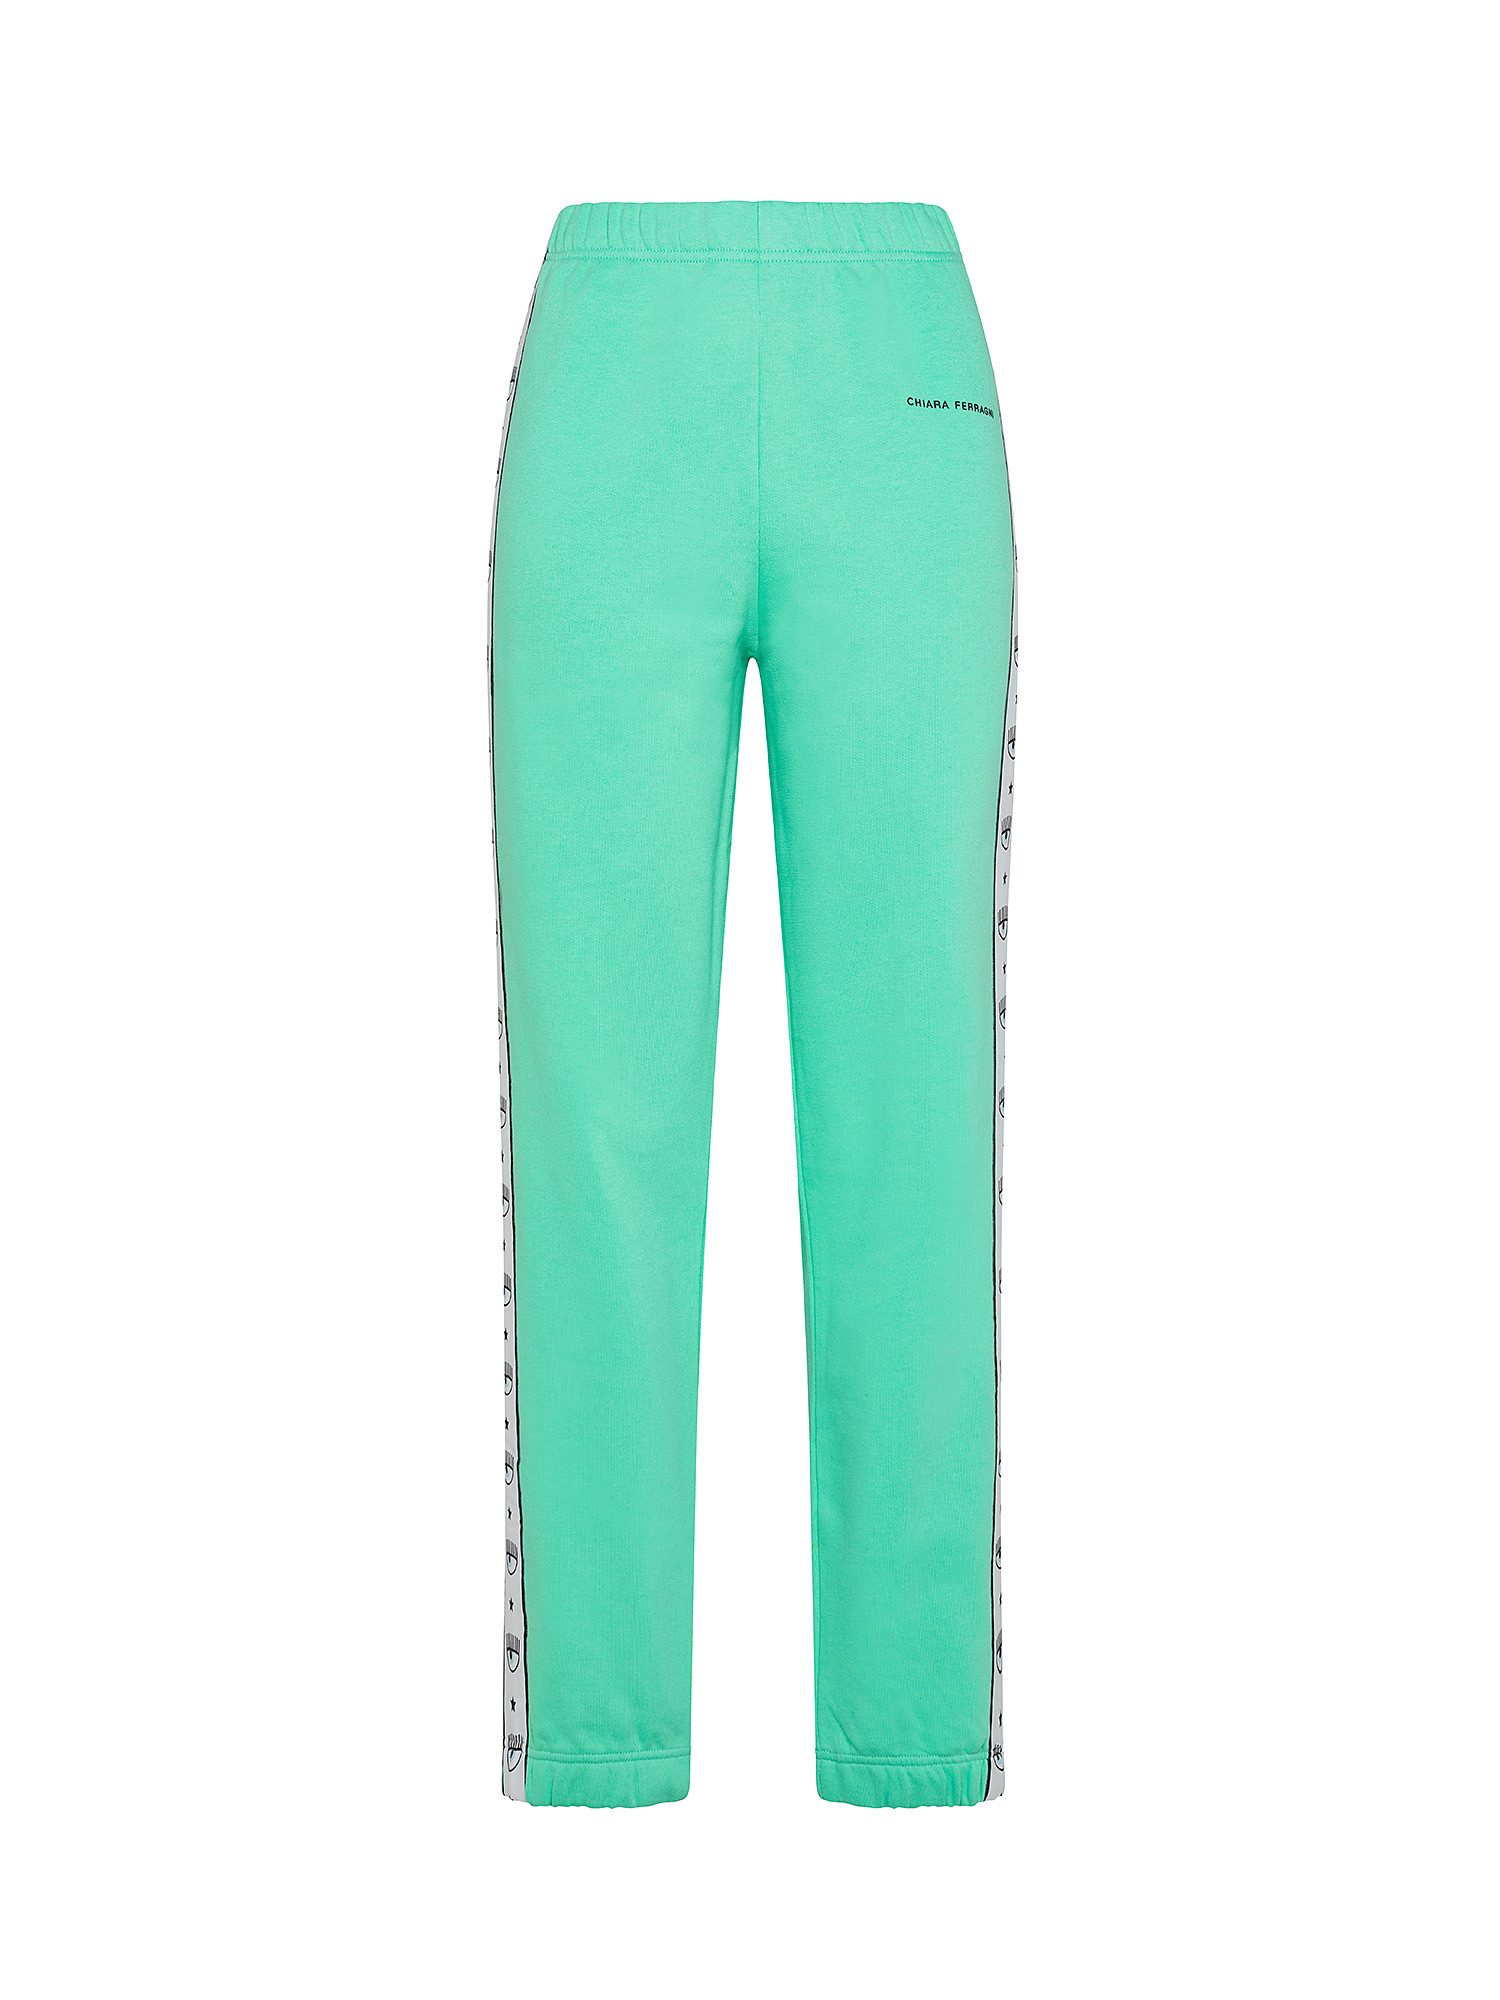 Logo Tape trousers, Teal, large image number 0